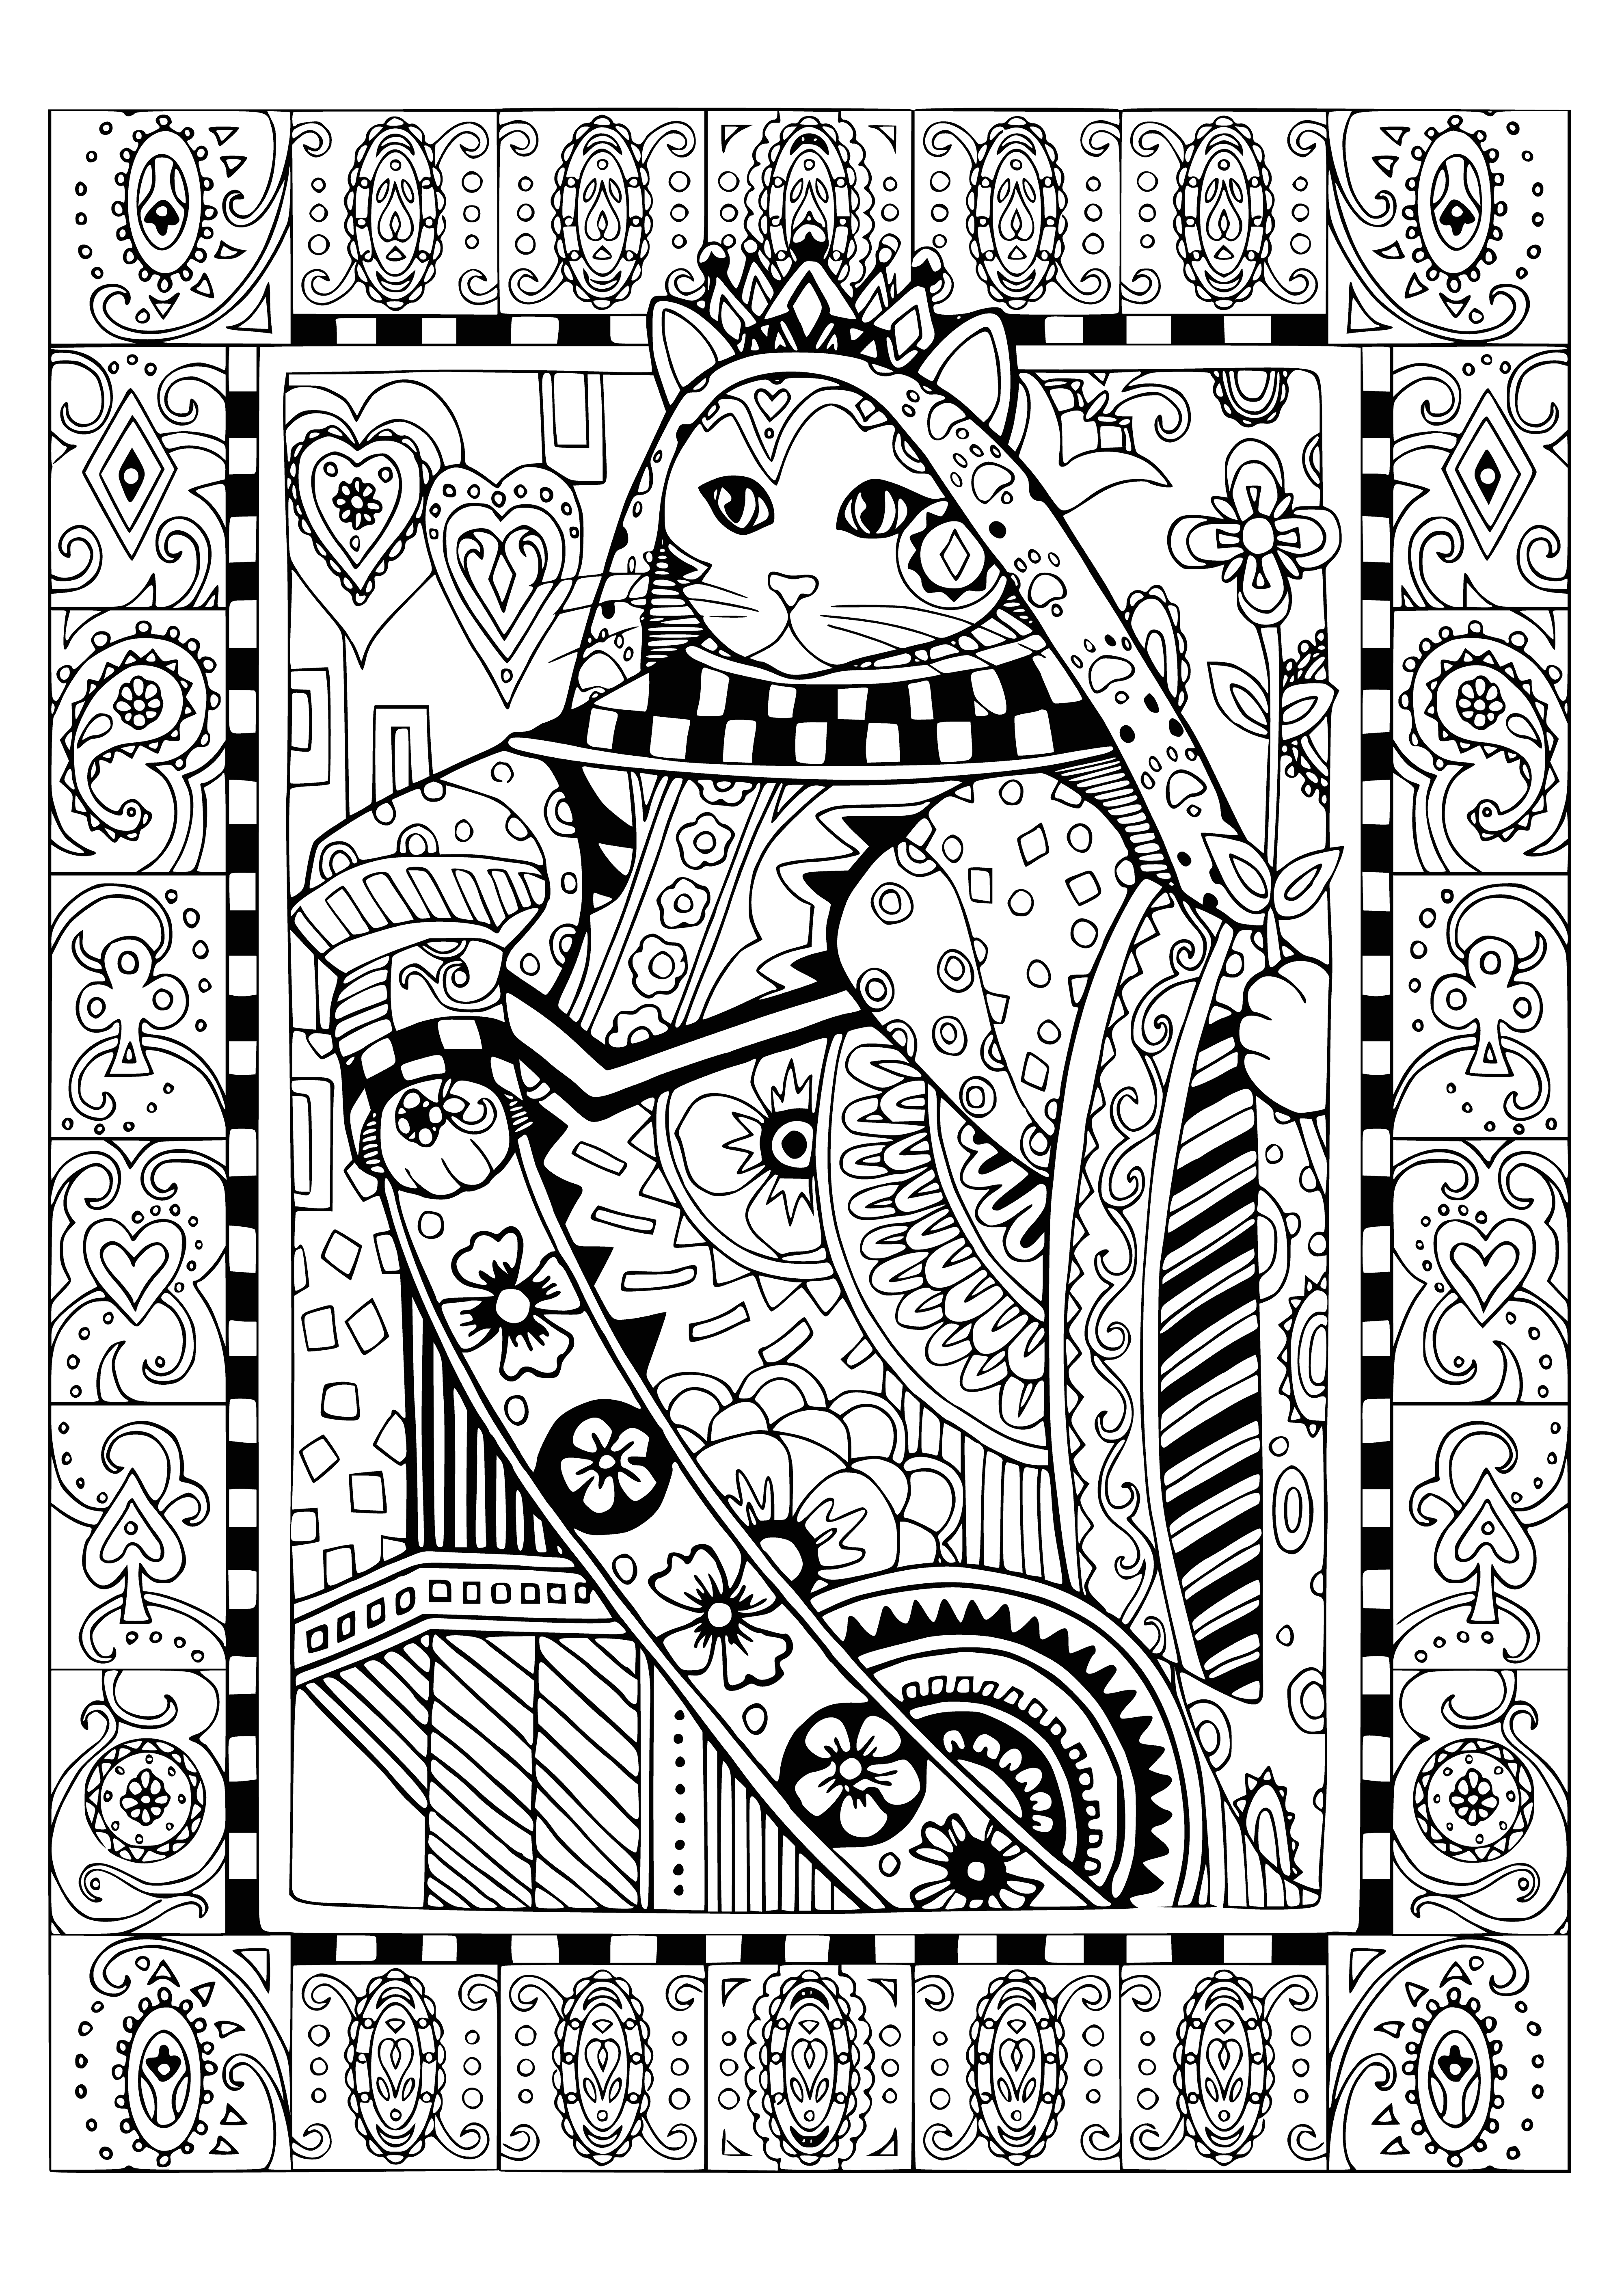 Queen Cleo coloring page